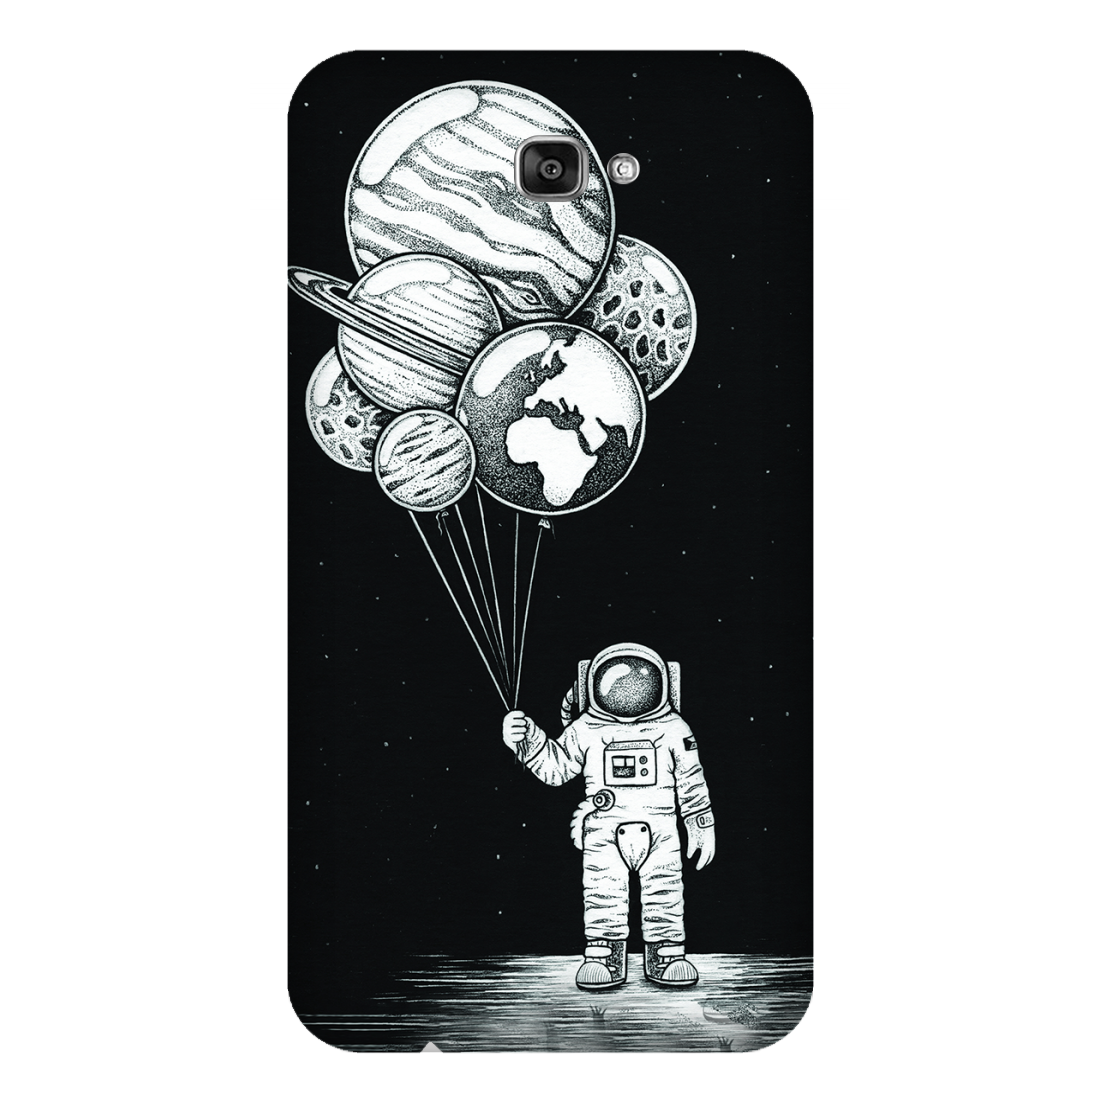 Cosmic Balloons in Astronaut Hand Case Samsung Galaxy J7 Prime